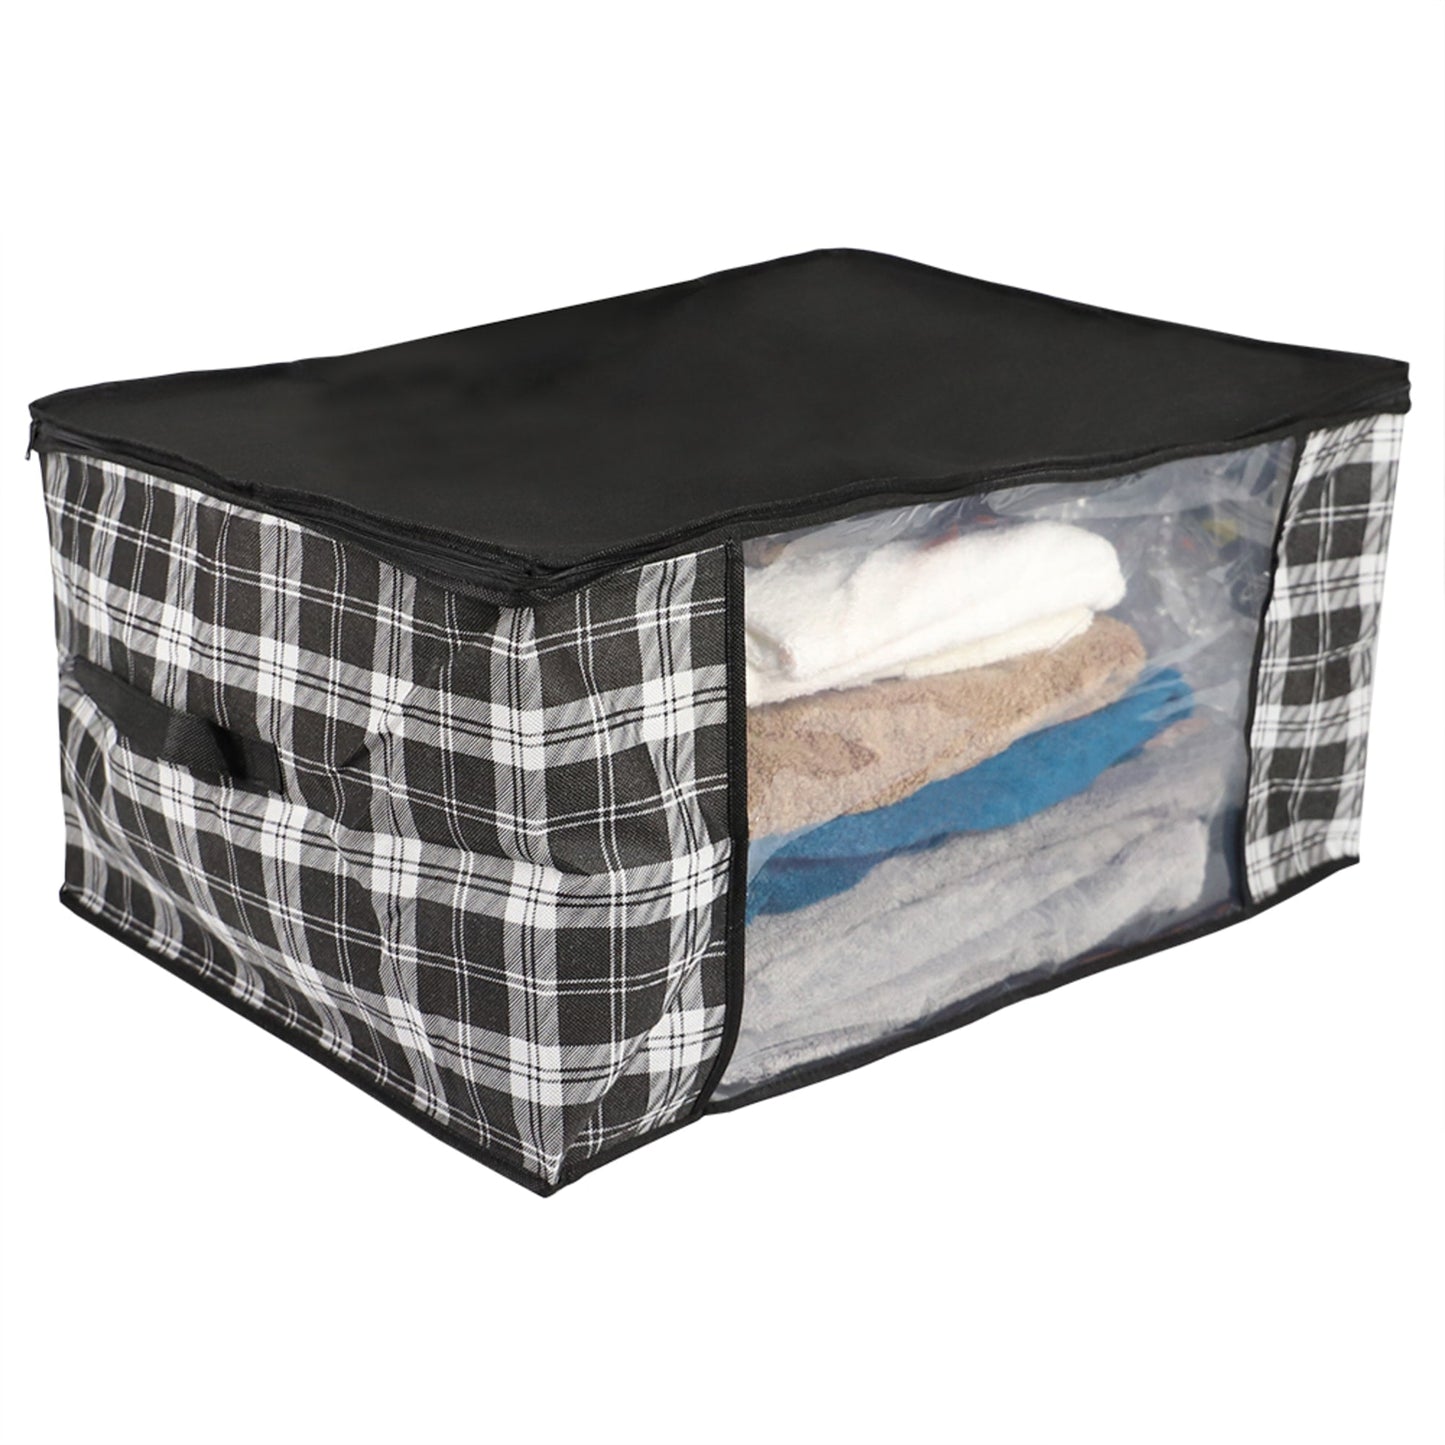 Plaid Non-Woven Blanket Bag with See-through Window, Black